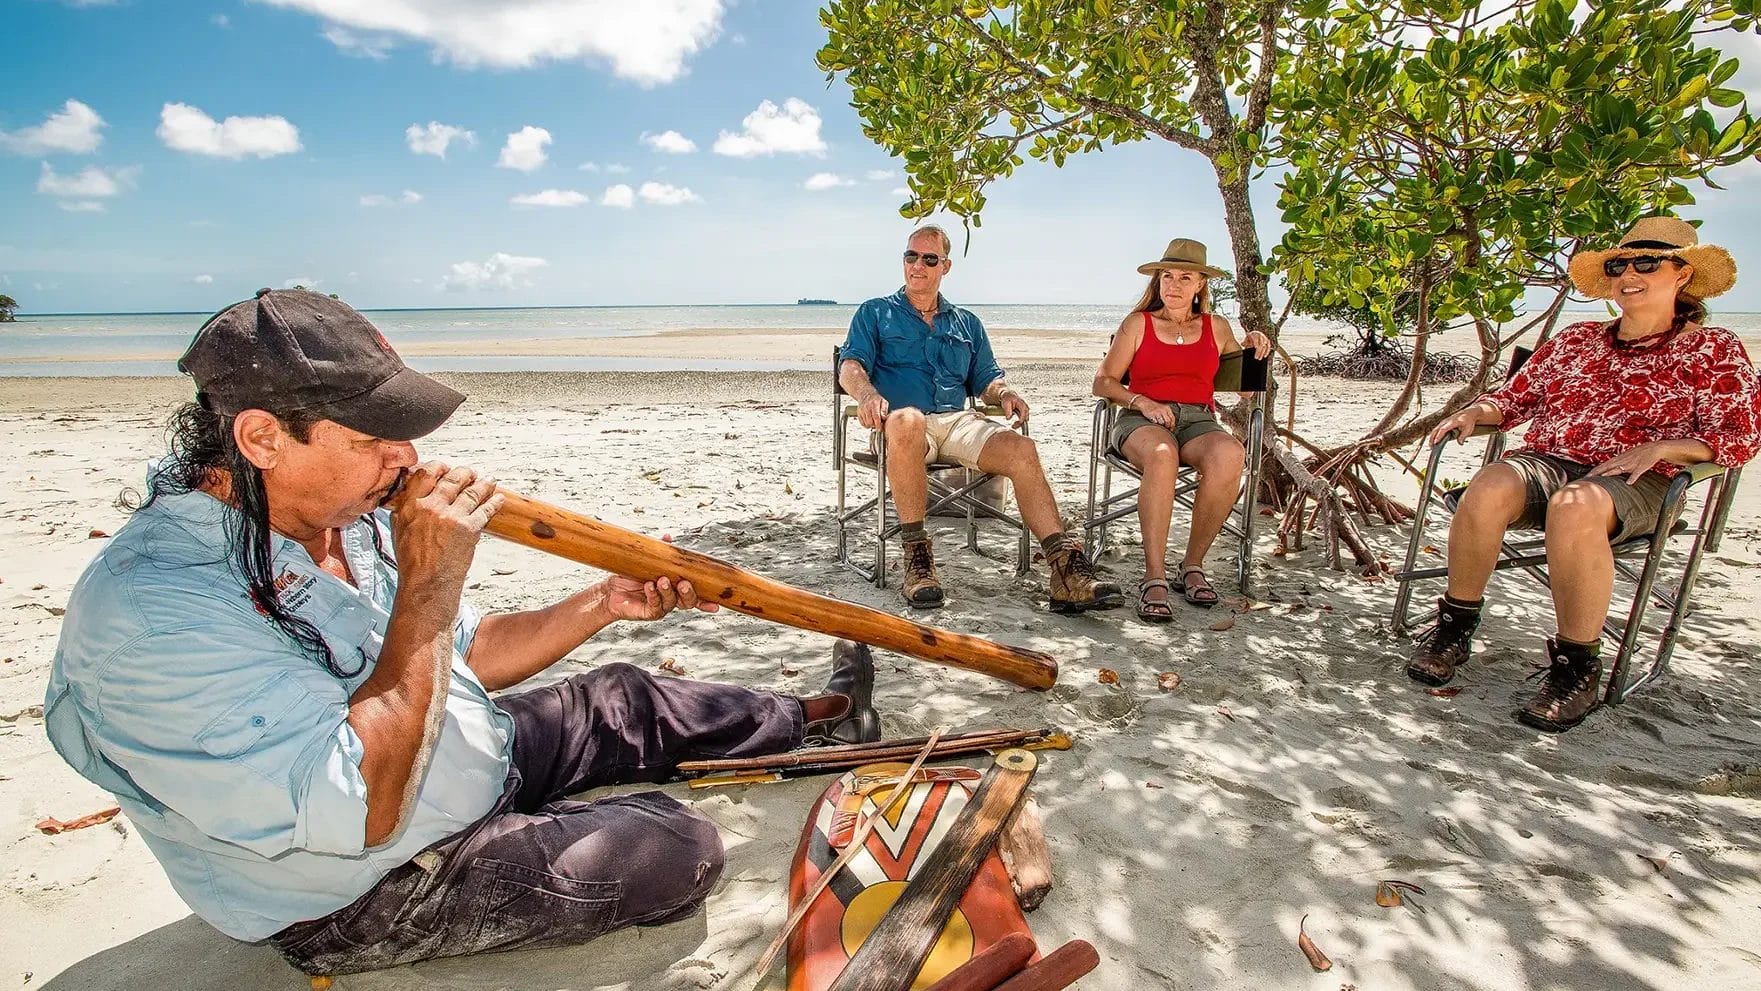 Three travellers watching a didgeridoo performance on a white sand beach